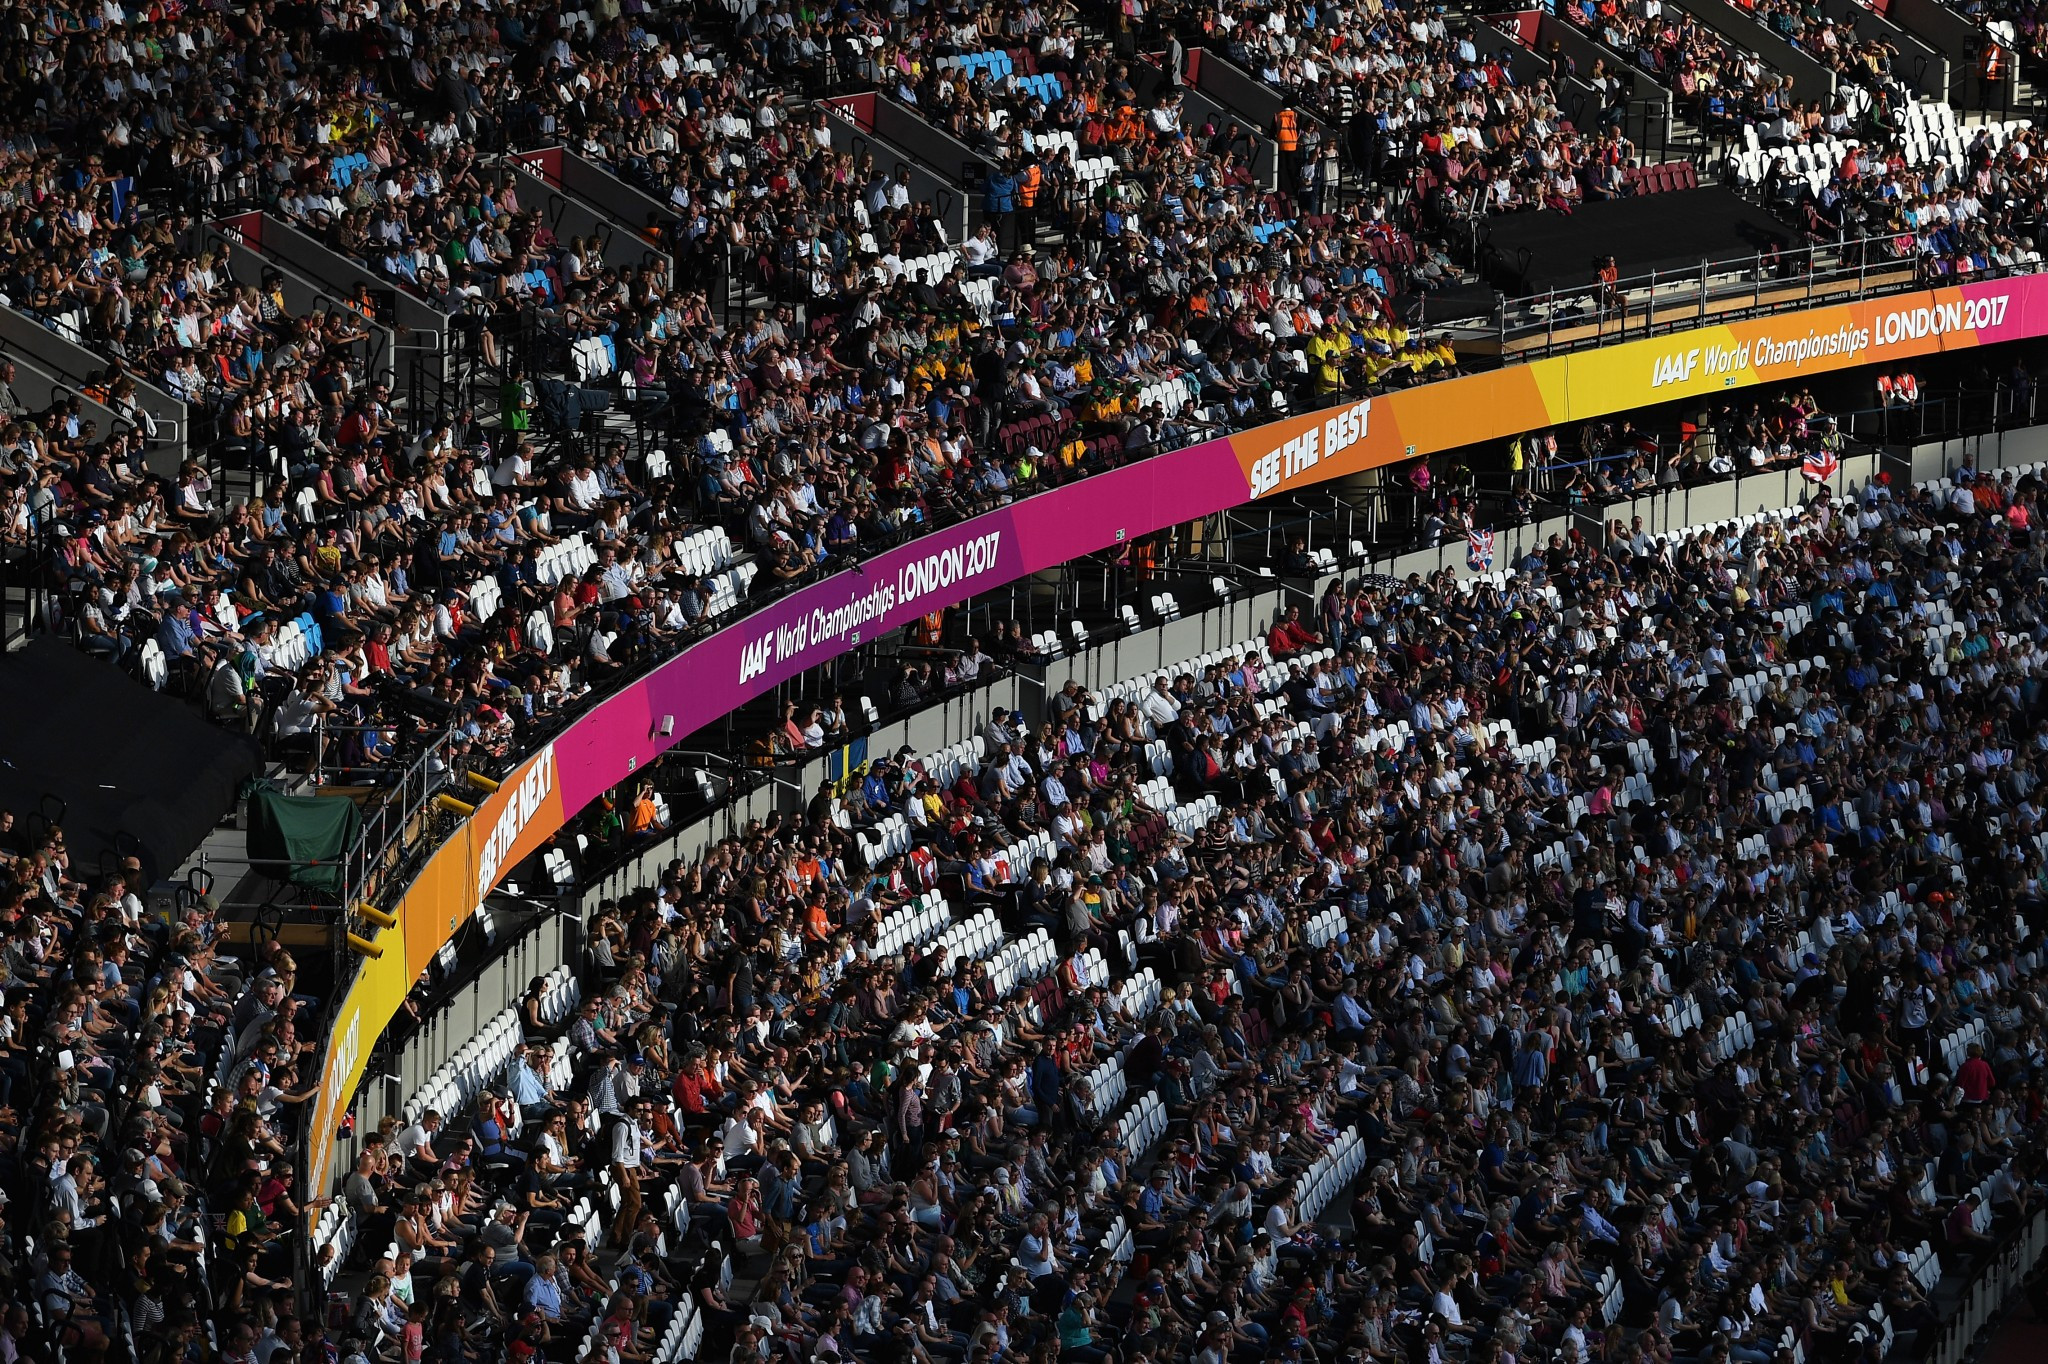 Every day of competition has been watched by a huge crowd inside the Olympic Stadium ©Getty Images